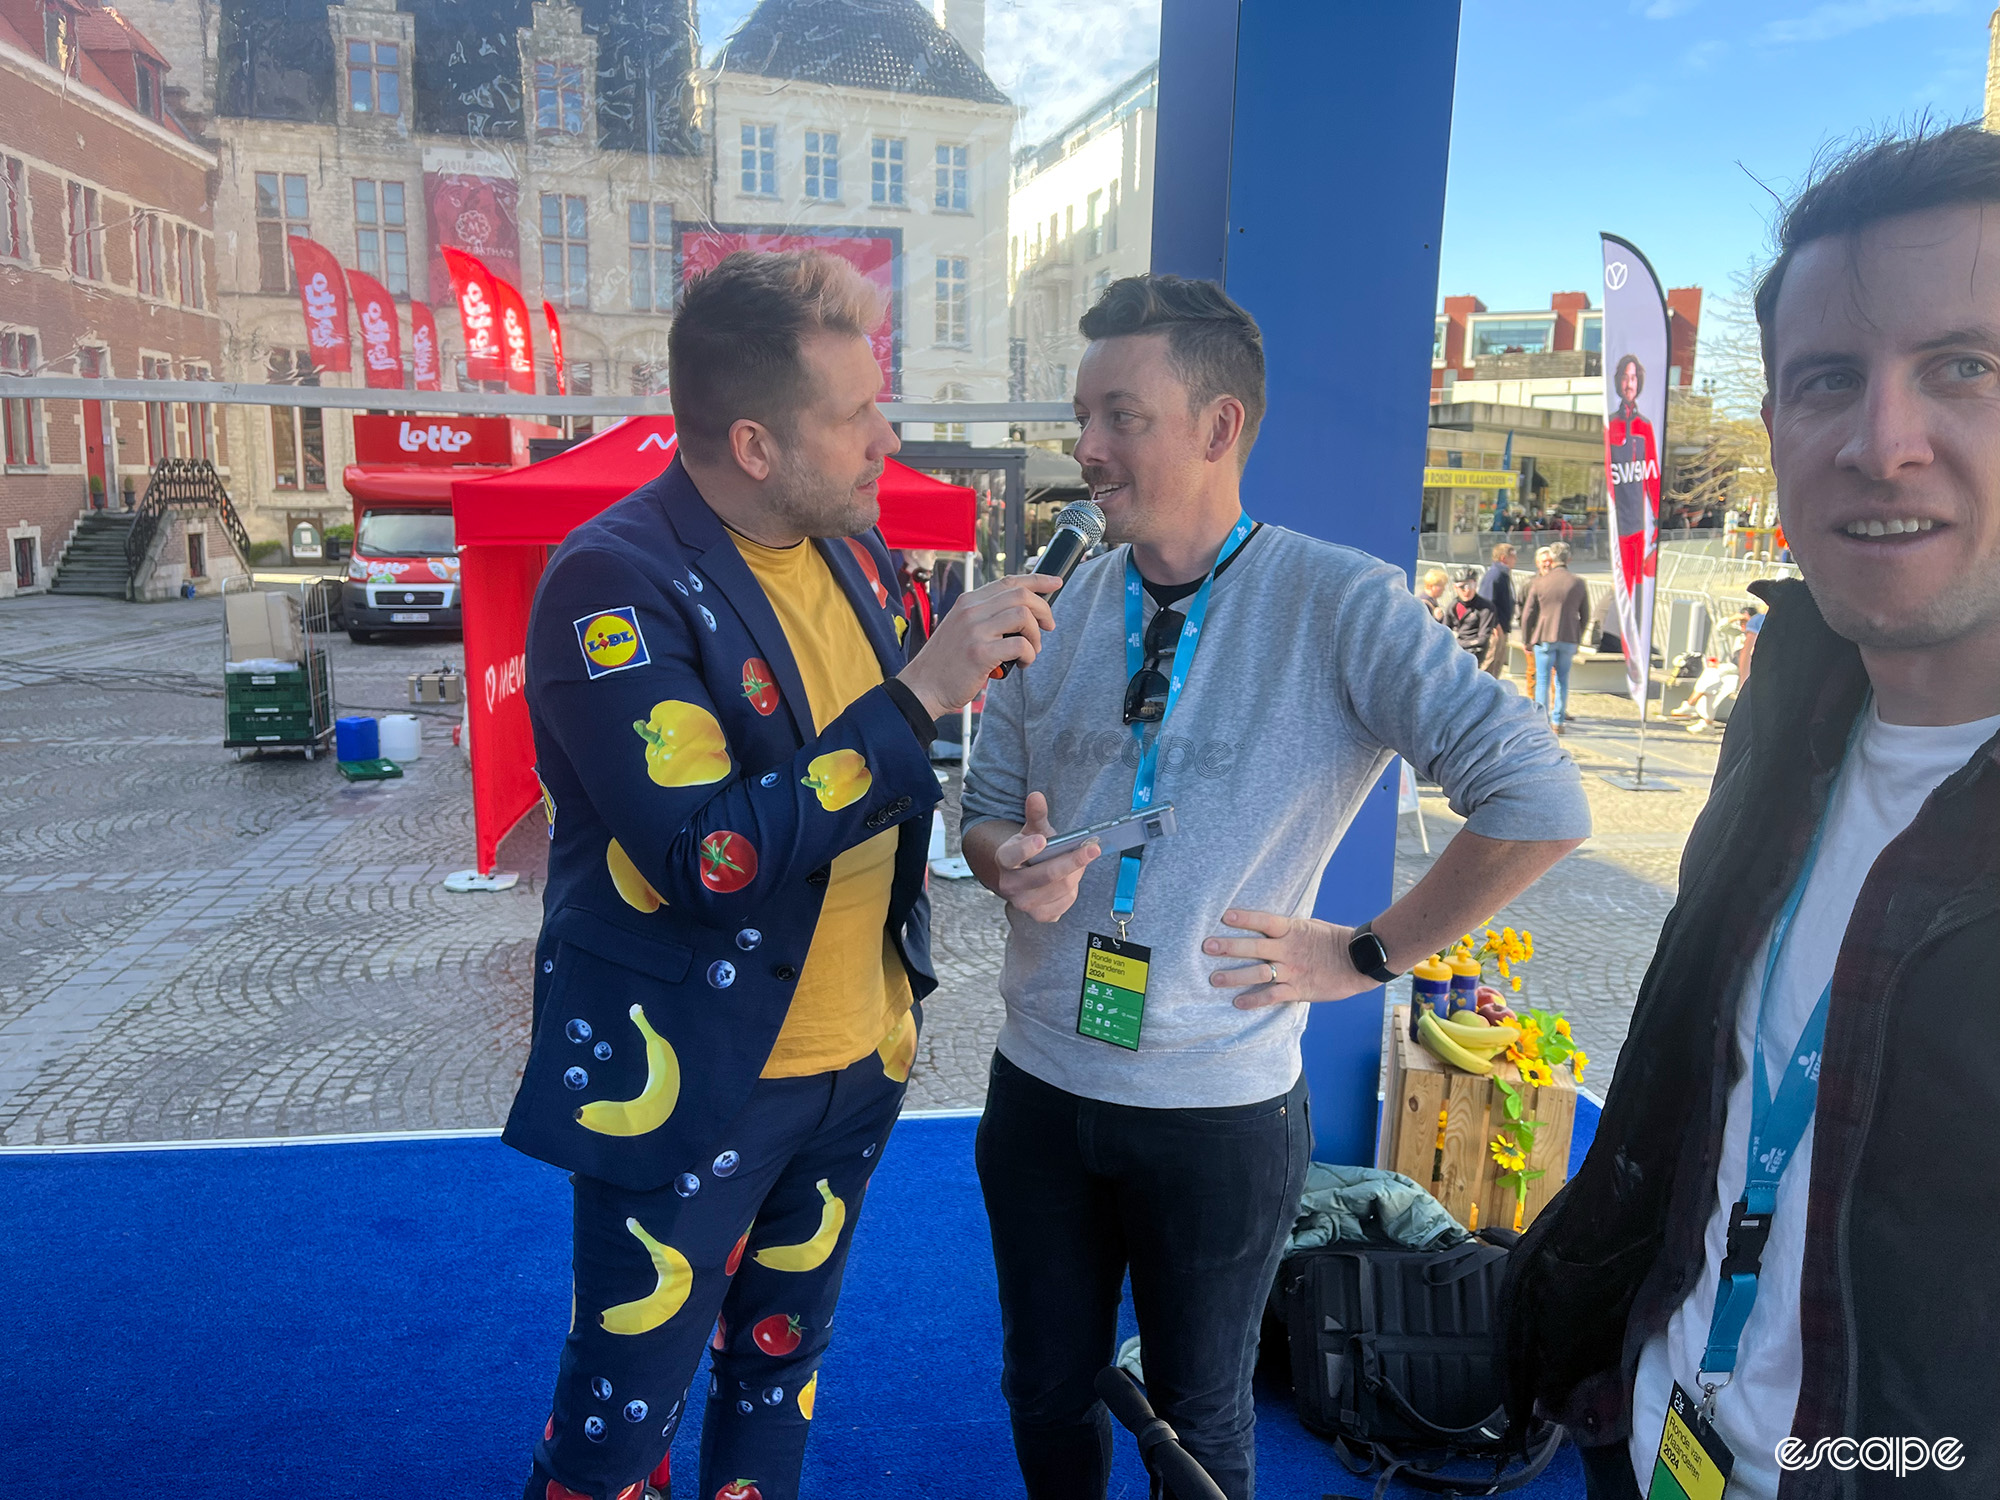 Iain is interviewed by the Lidl man on stage.